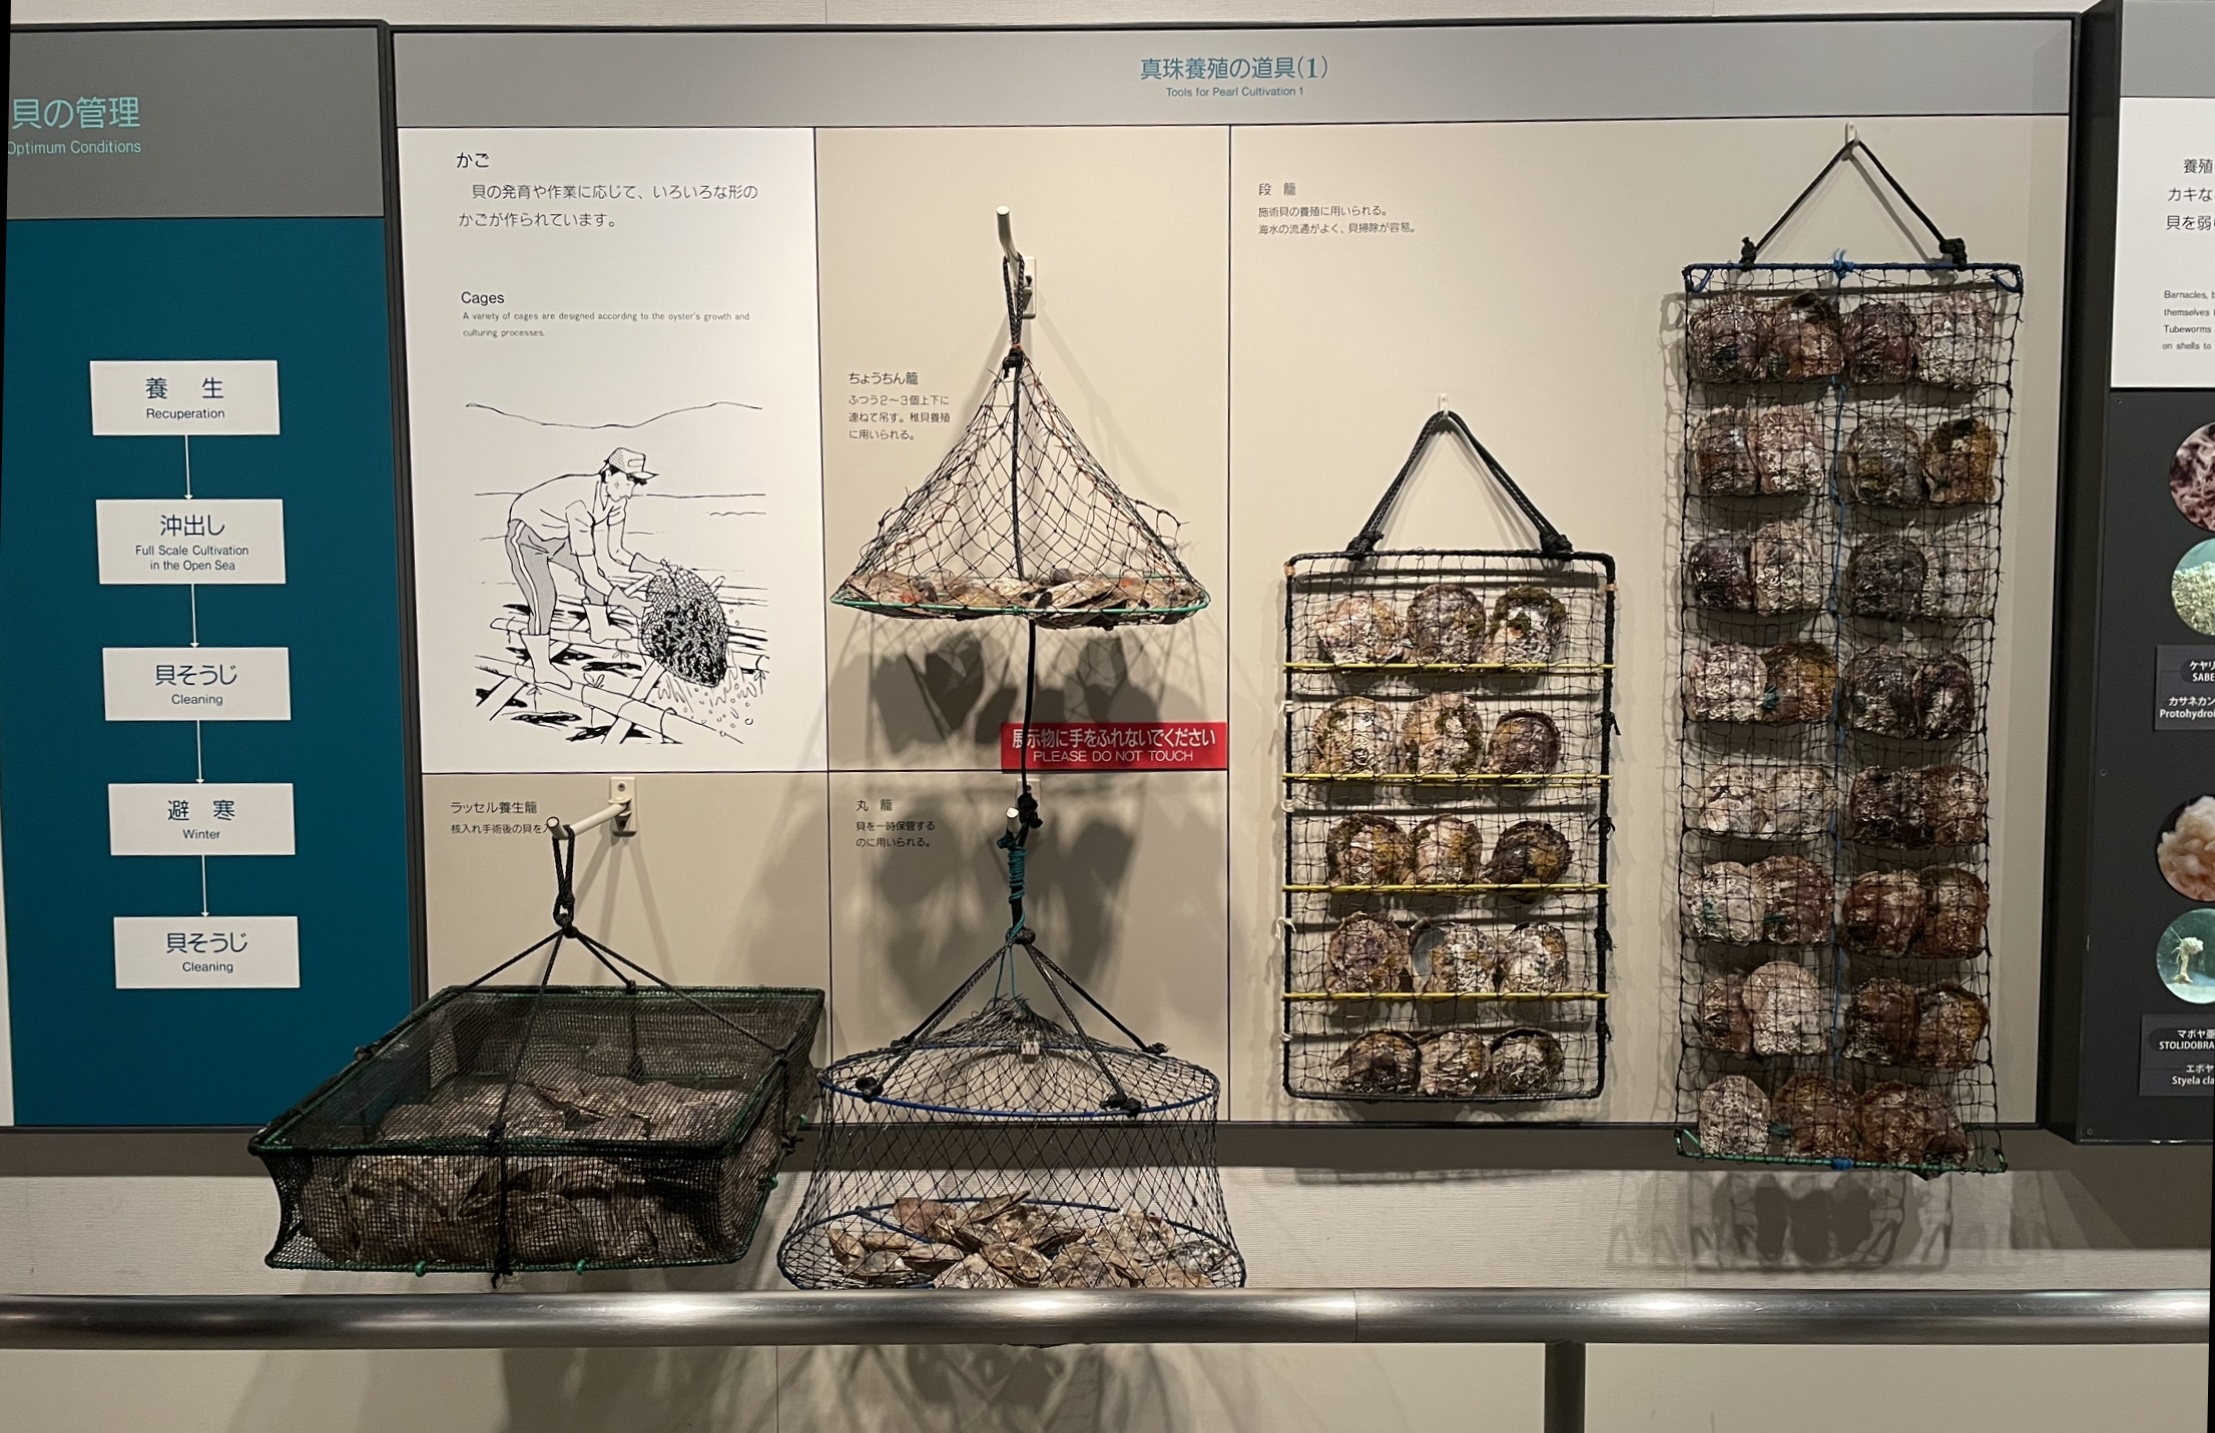 Pearl oyster panel and lantern nets - Mikimoto Pearl Museum